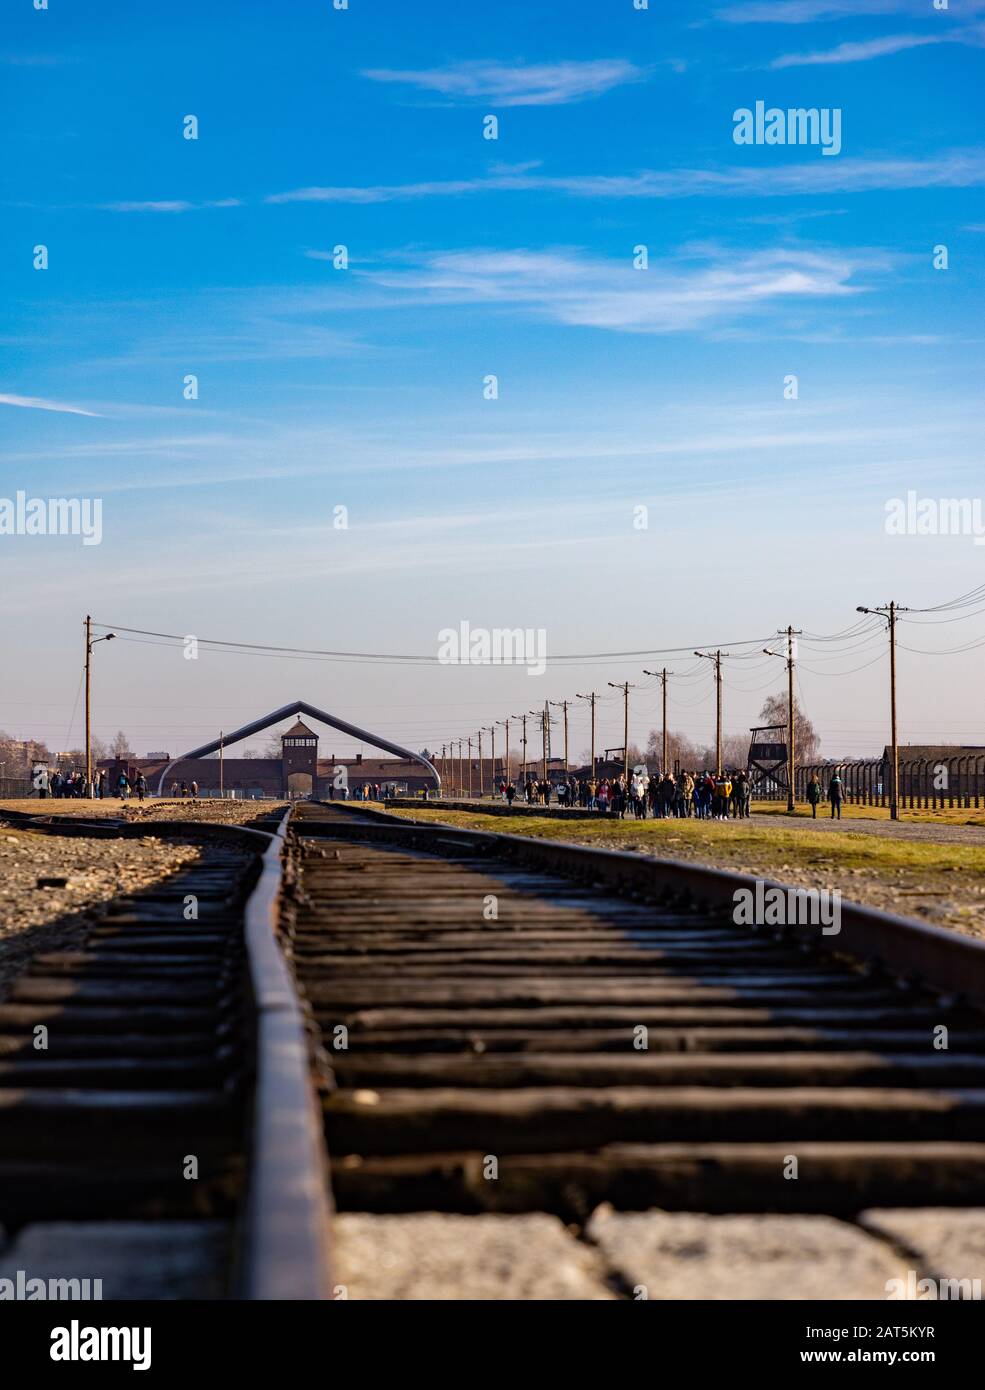 A picture of the railroad tracks at Auschwitz II - Birkenau. Stock Photo